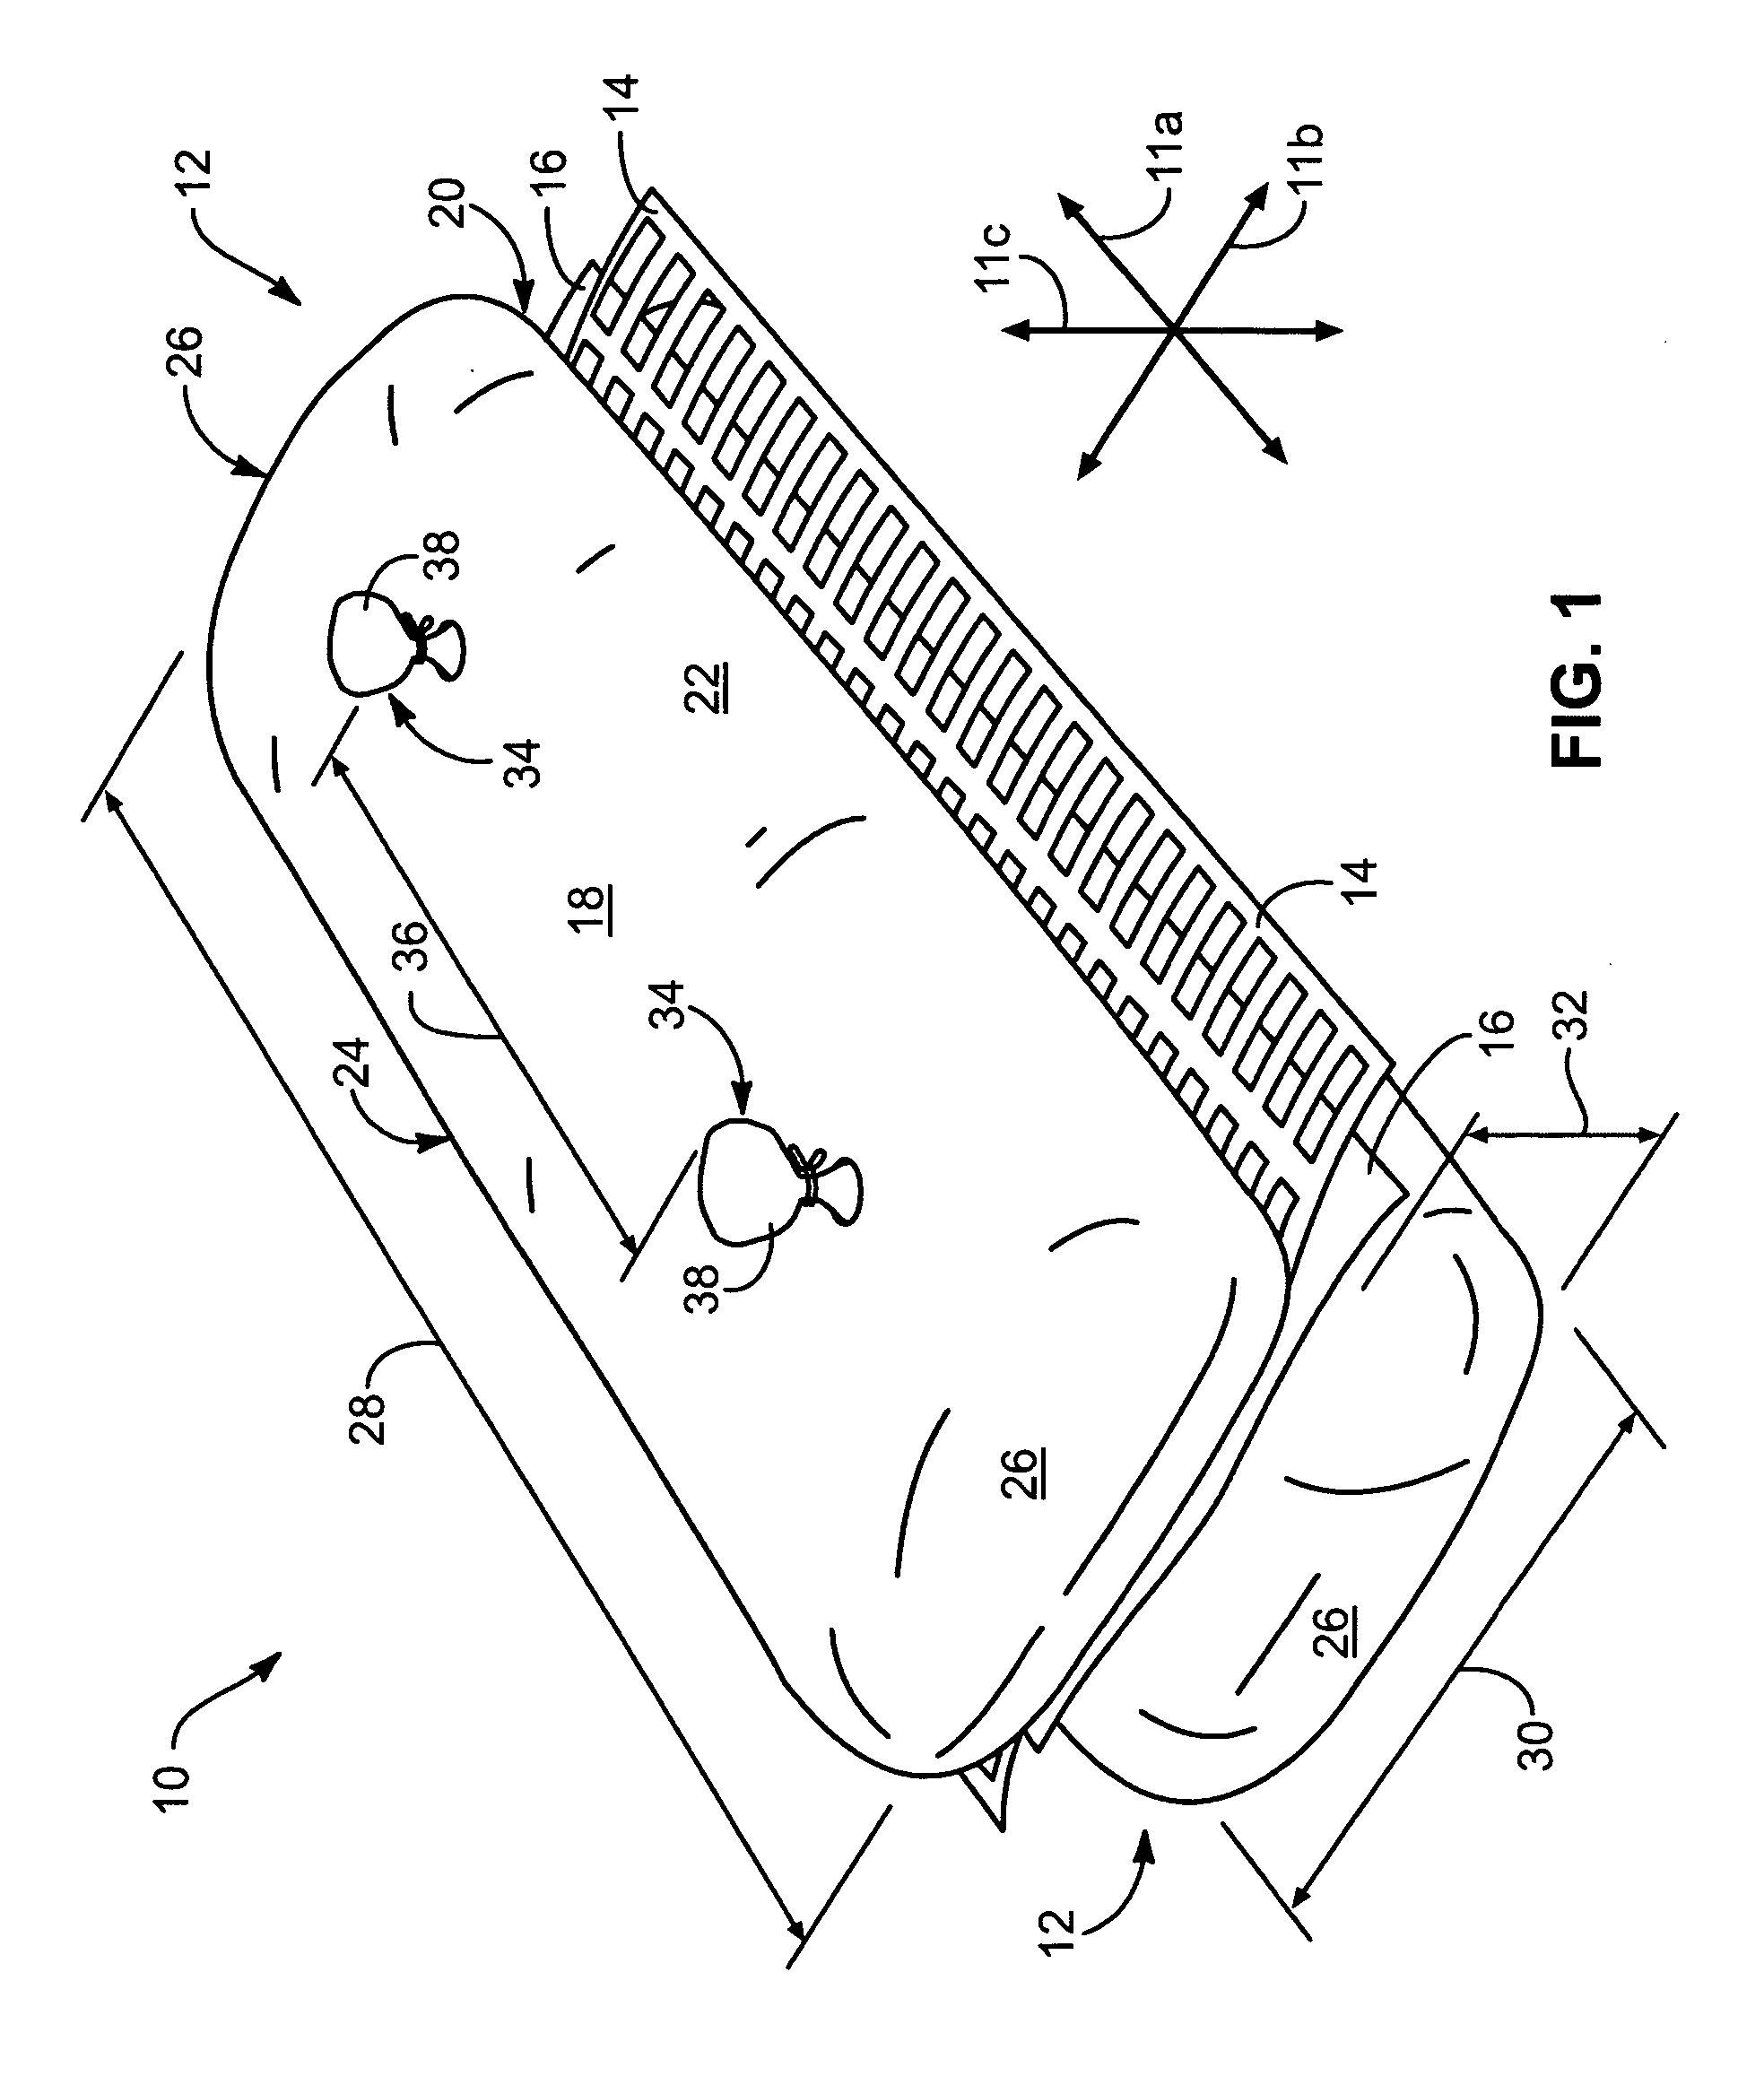 Fine-grained fill reinforcing apparatus and method